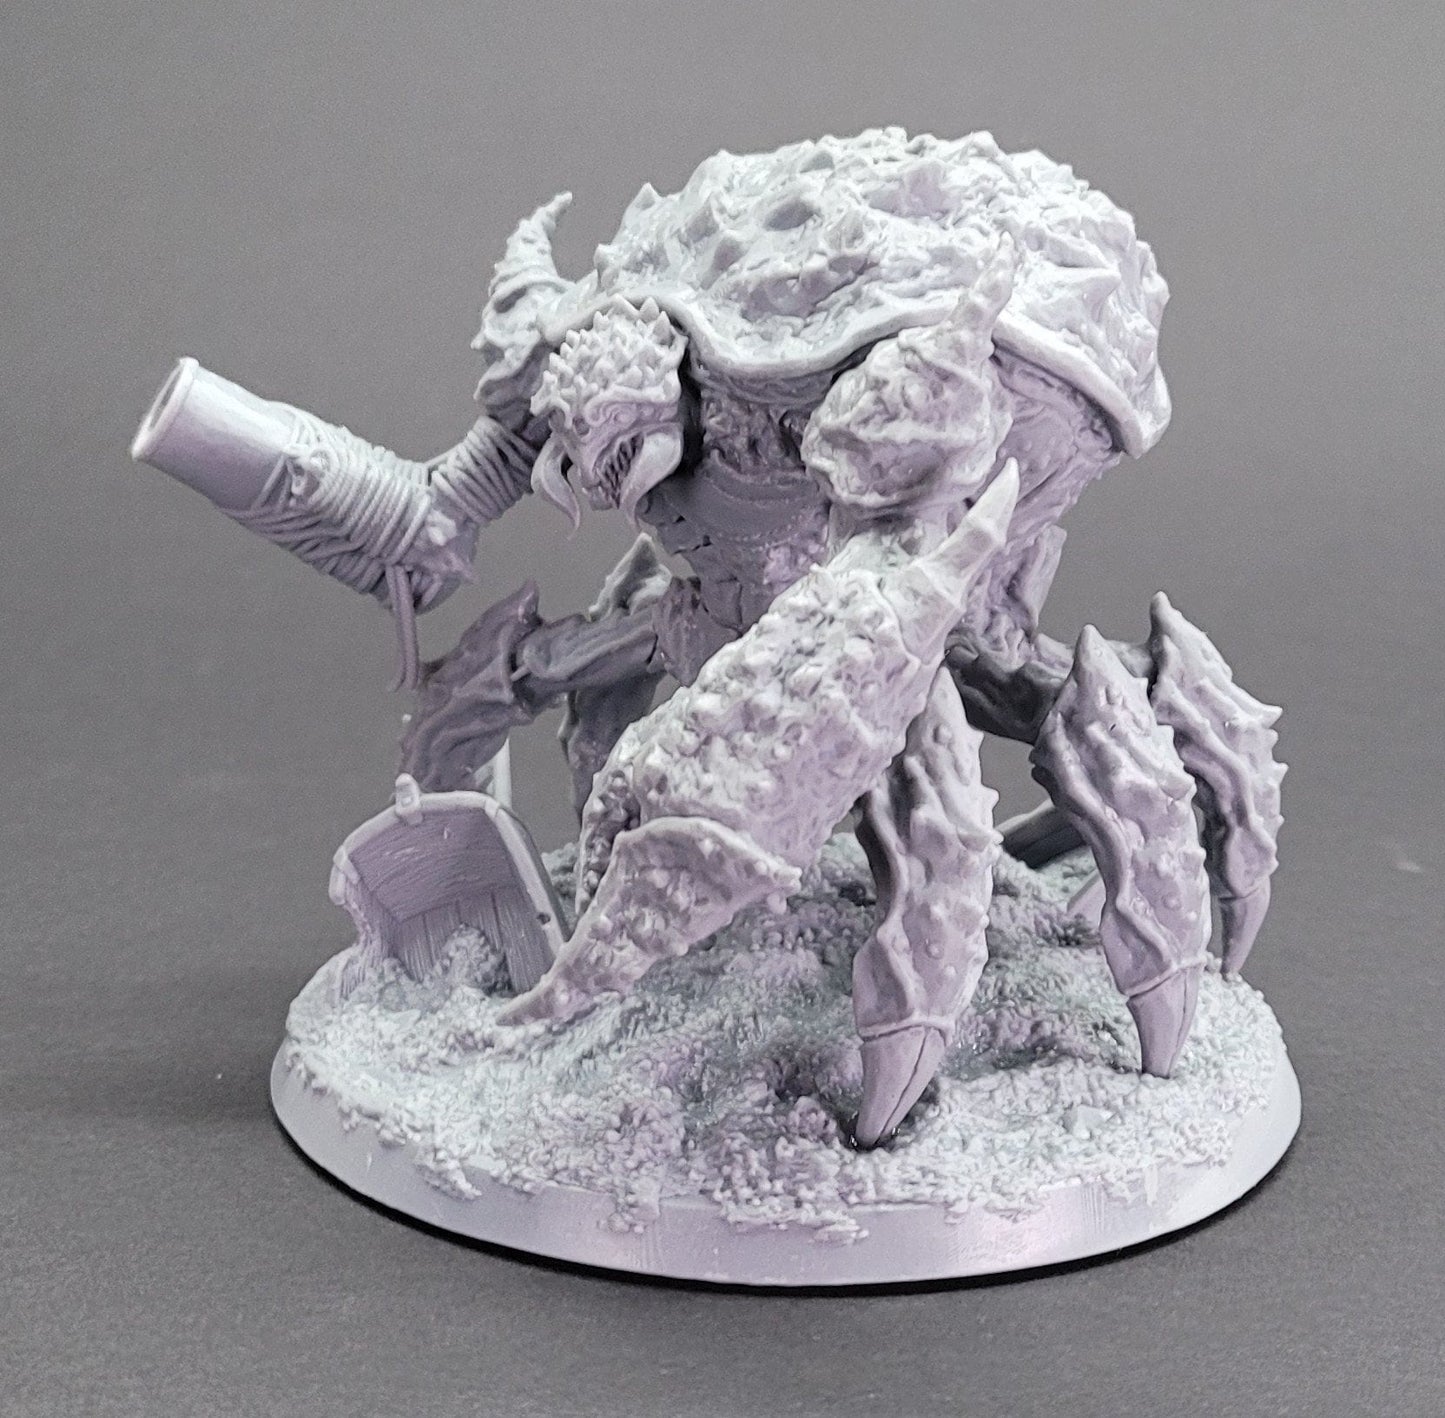 Ucar Major - Curse of the Drowned Crew - Highly Detailed Resin 3D Printed Miniature